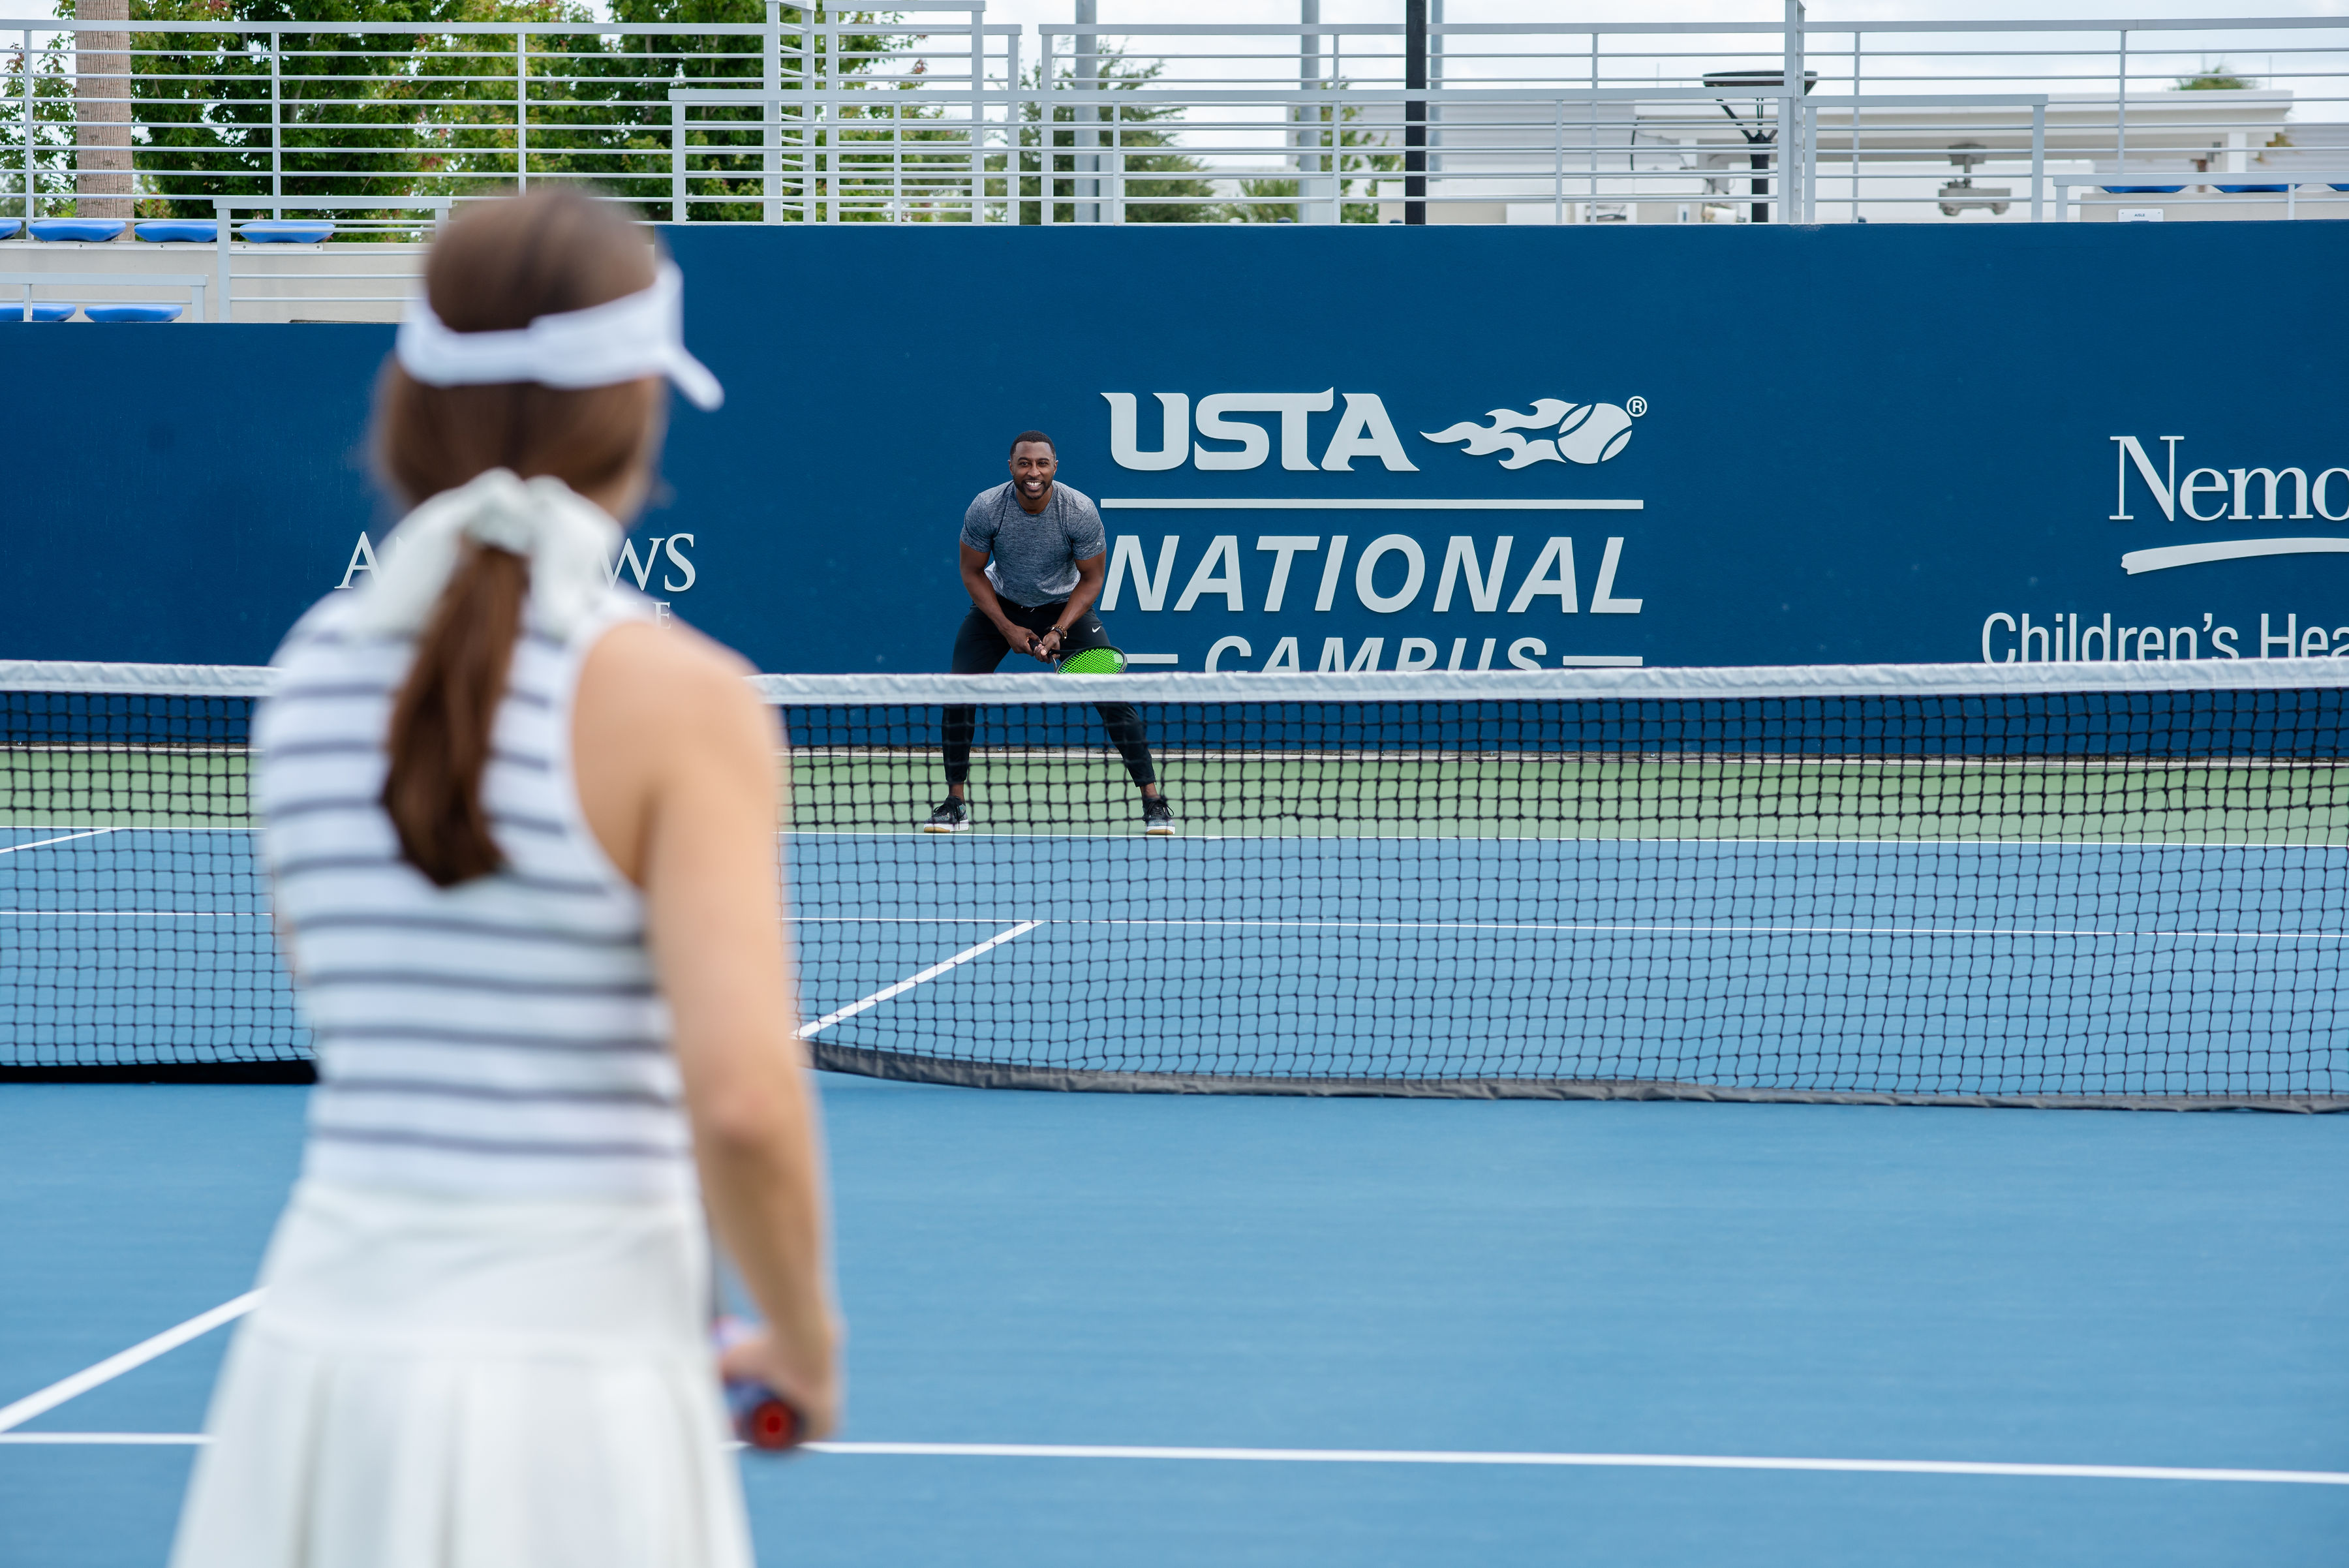 two people playing tennis at usta national campus